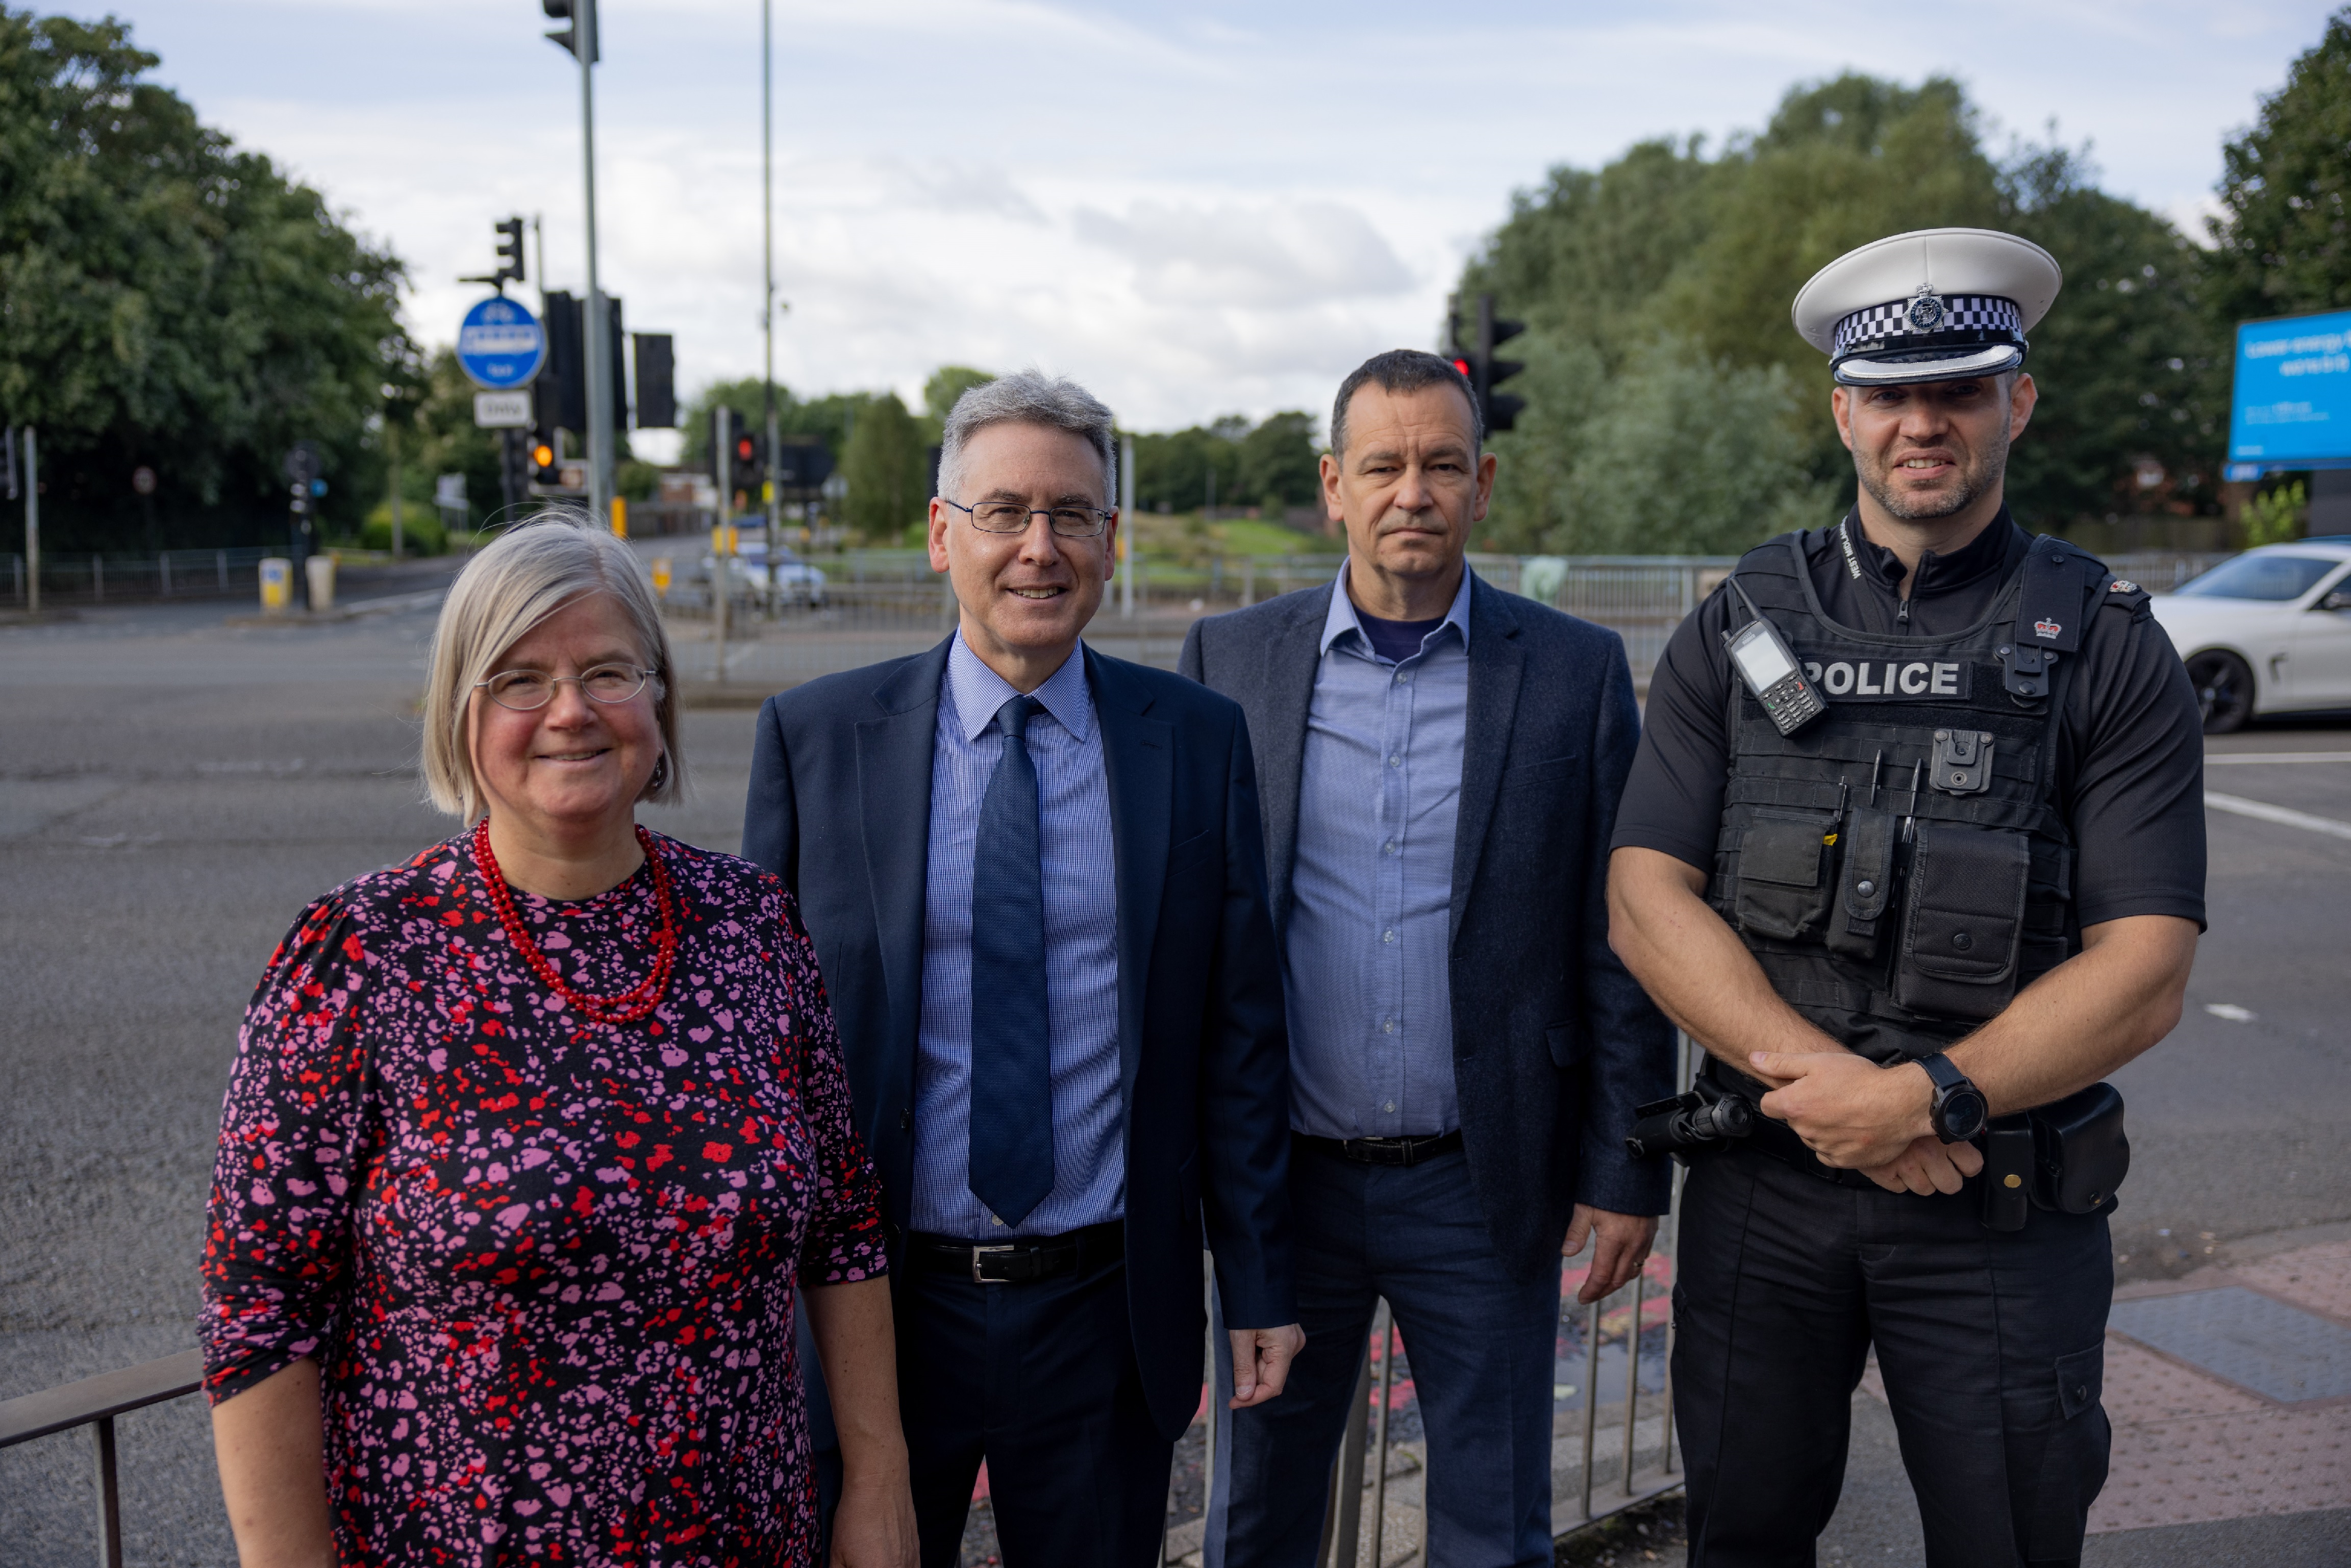 Cllr Liz Clements, cabinet member for transport at Birmingham City Council; Simon Foster, West Midlands Police and Crime Commissioner; Darren Divall, regional road safety manager for Transport for West Midlands; Superintendent Gareth Mason, head of roads policing in West Midlands, at the launch of today’s road safety crackdown.